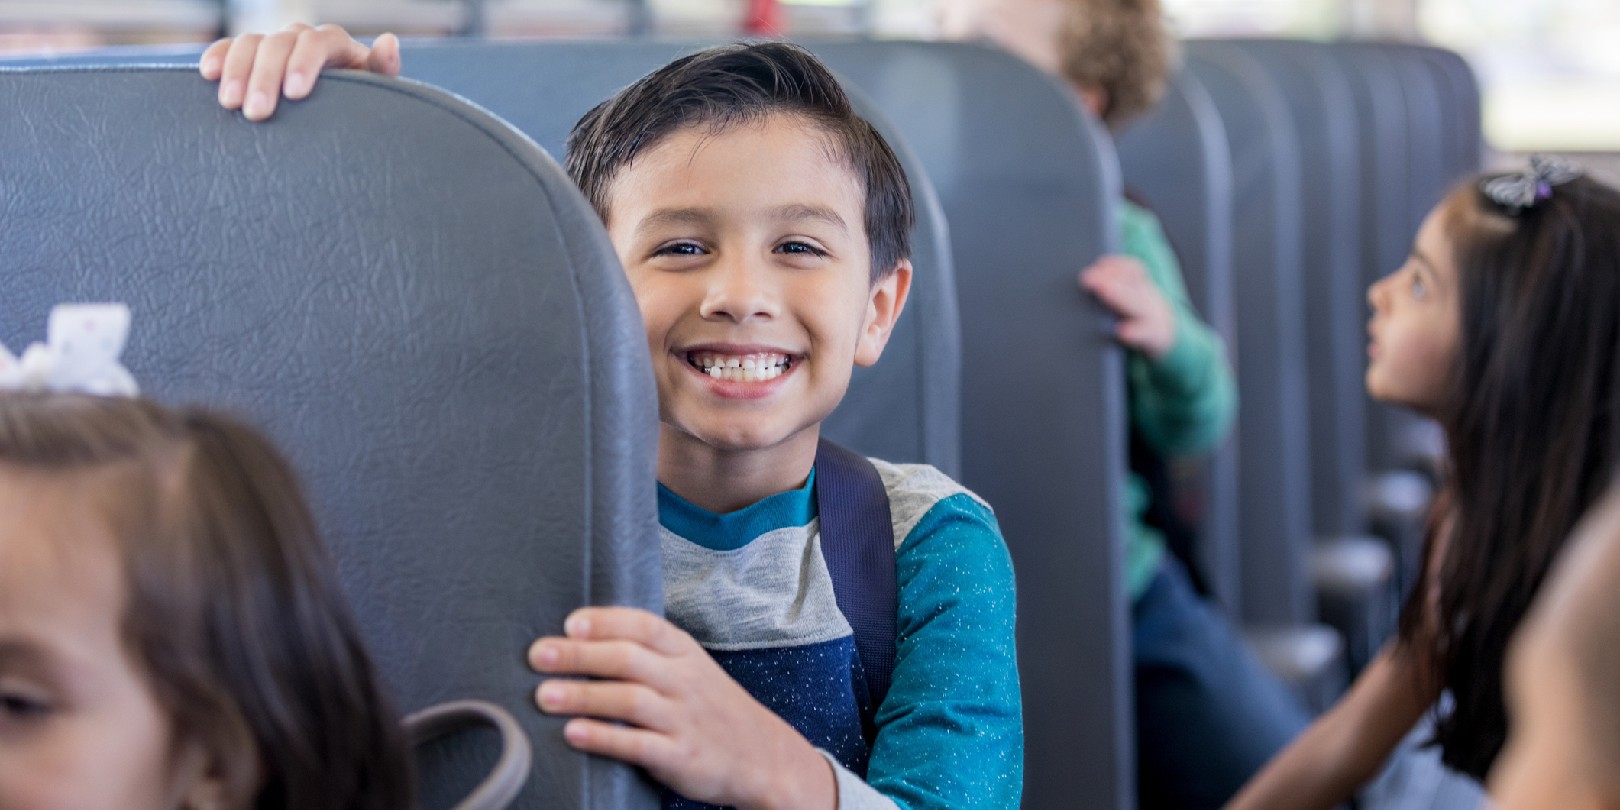 Schoolboy smiles excitedly while sitting on school bus